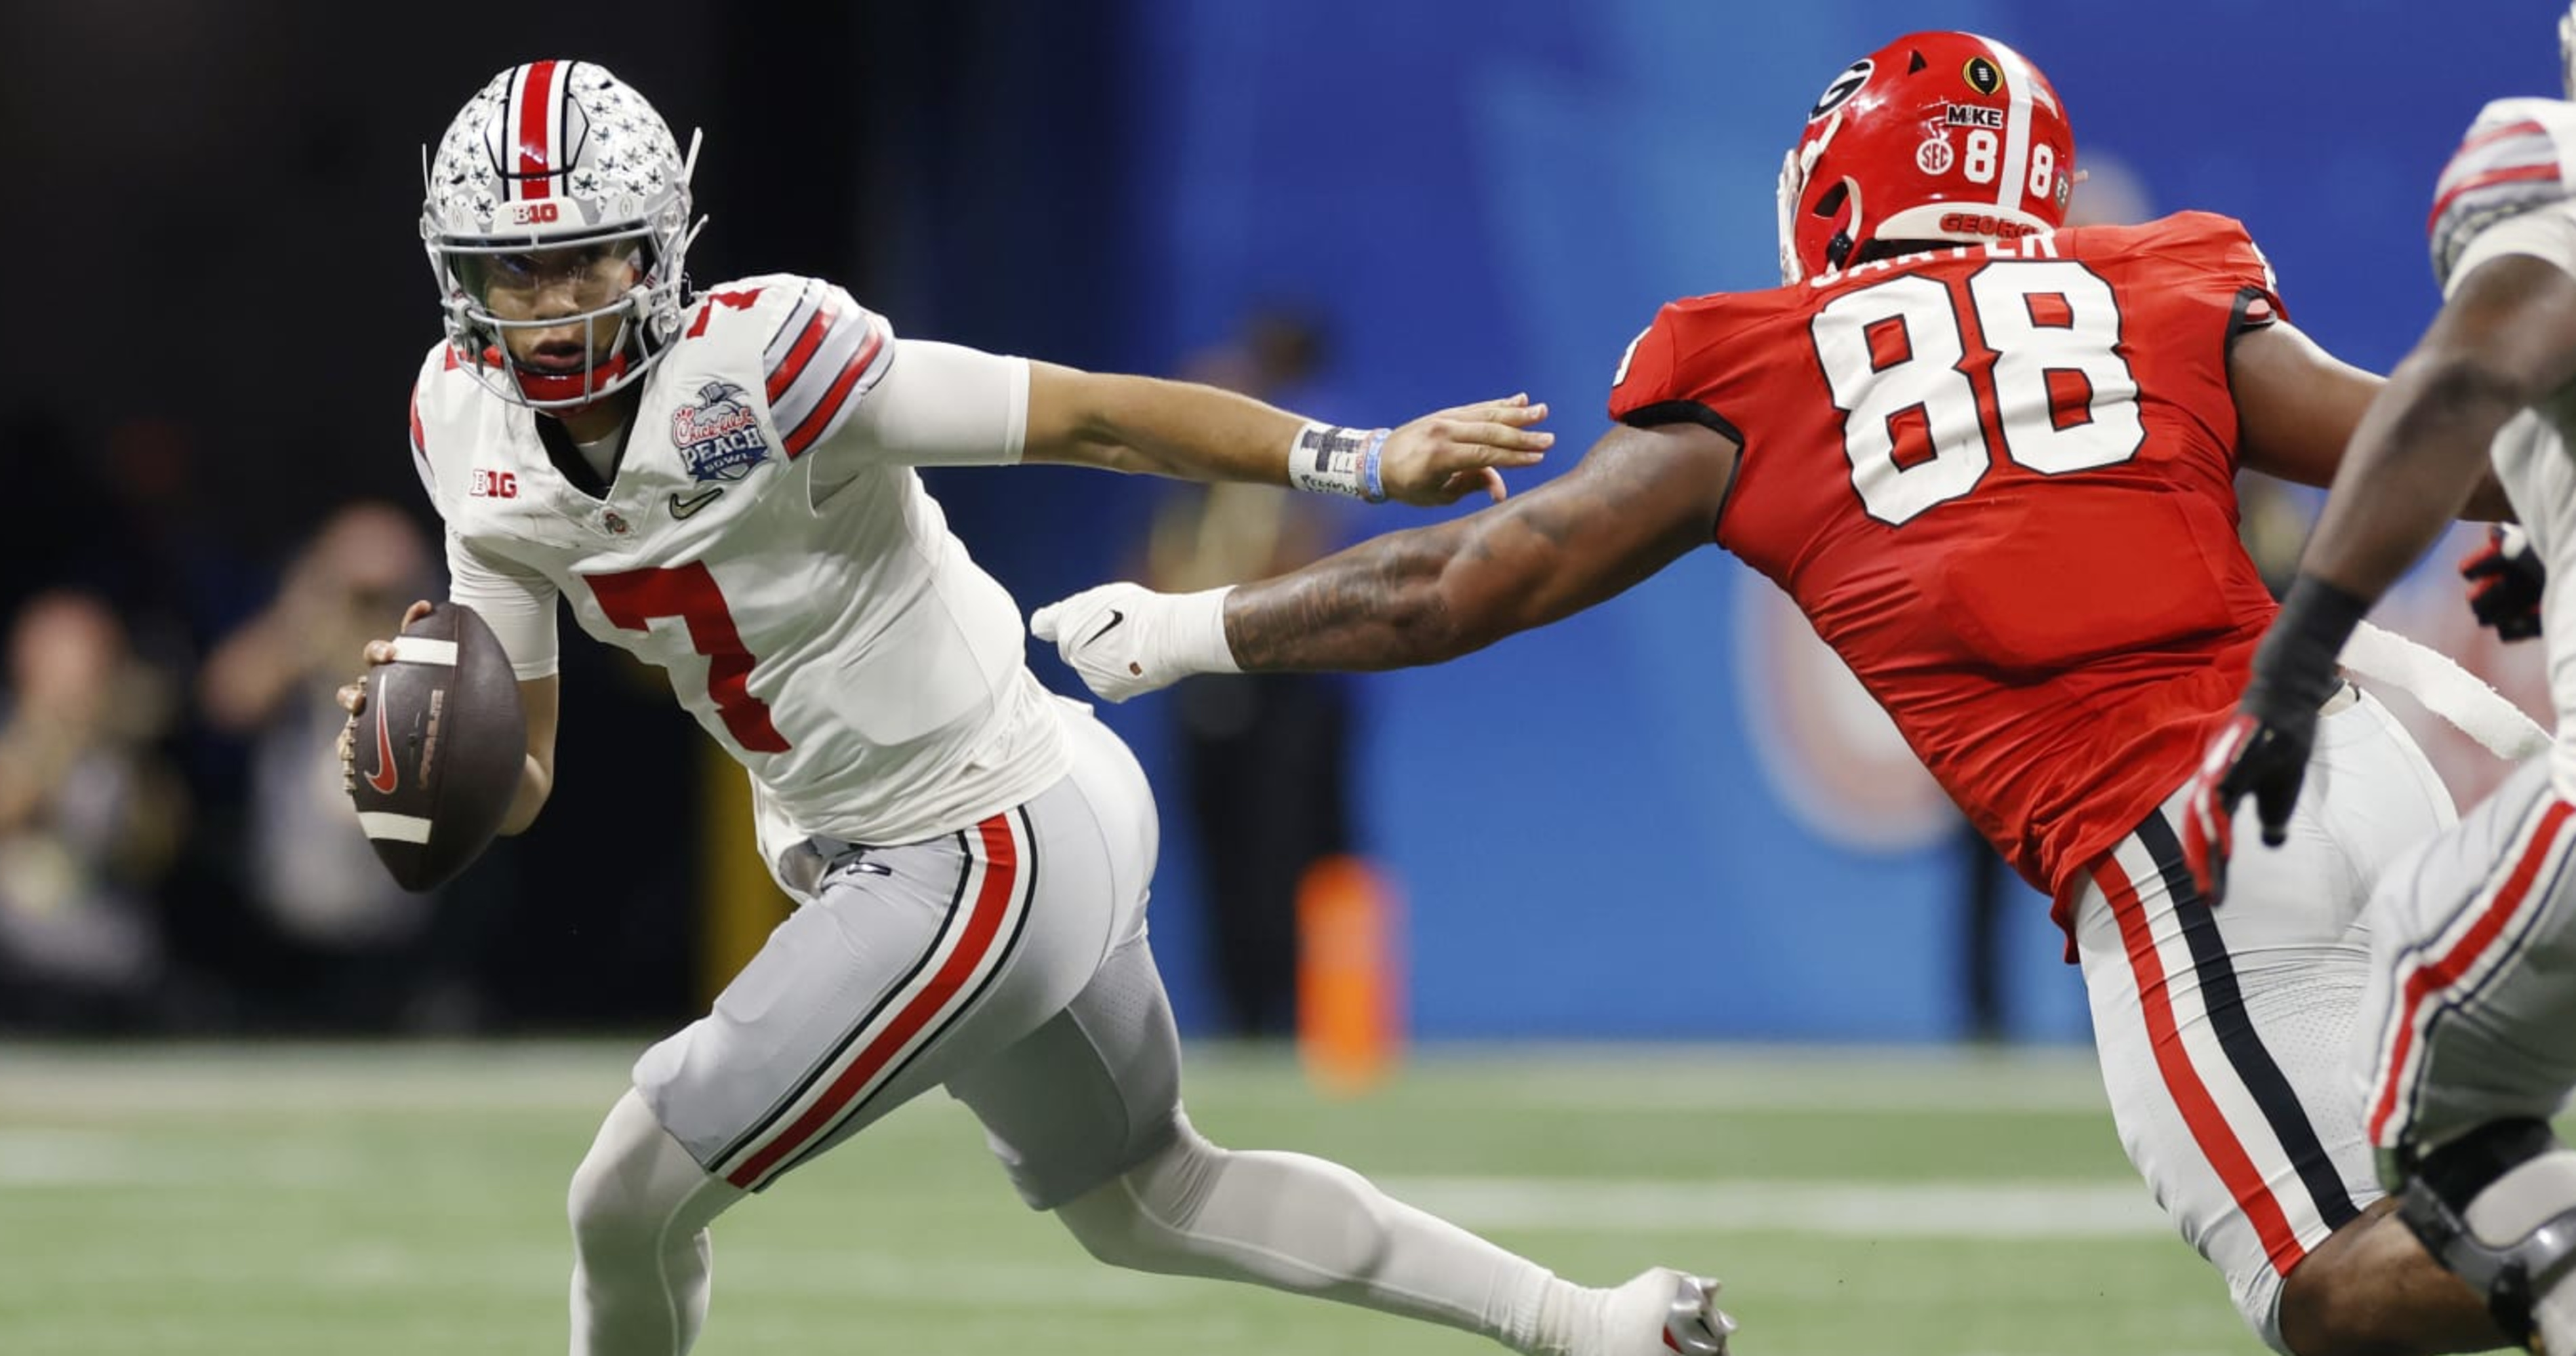 Scouting Shaun Wade: Ohio State star could be NFL draft's next CB1